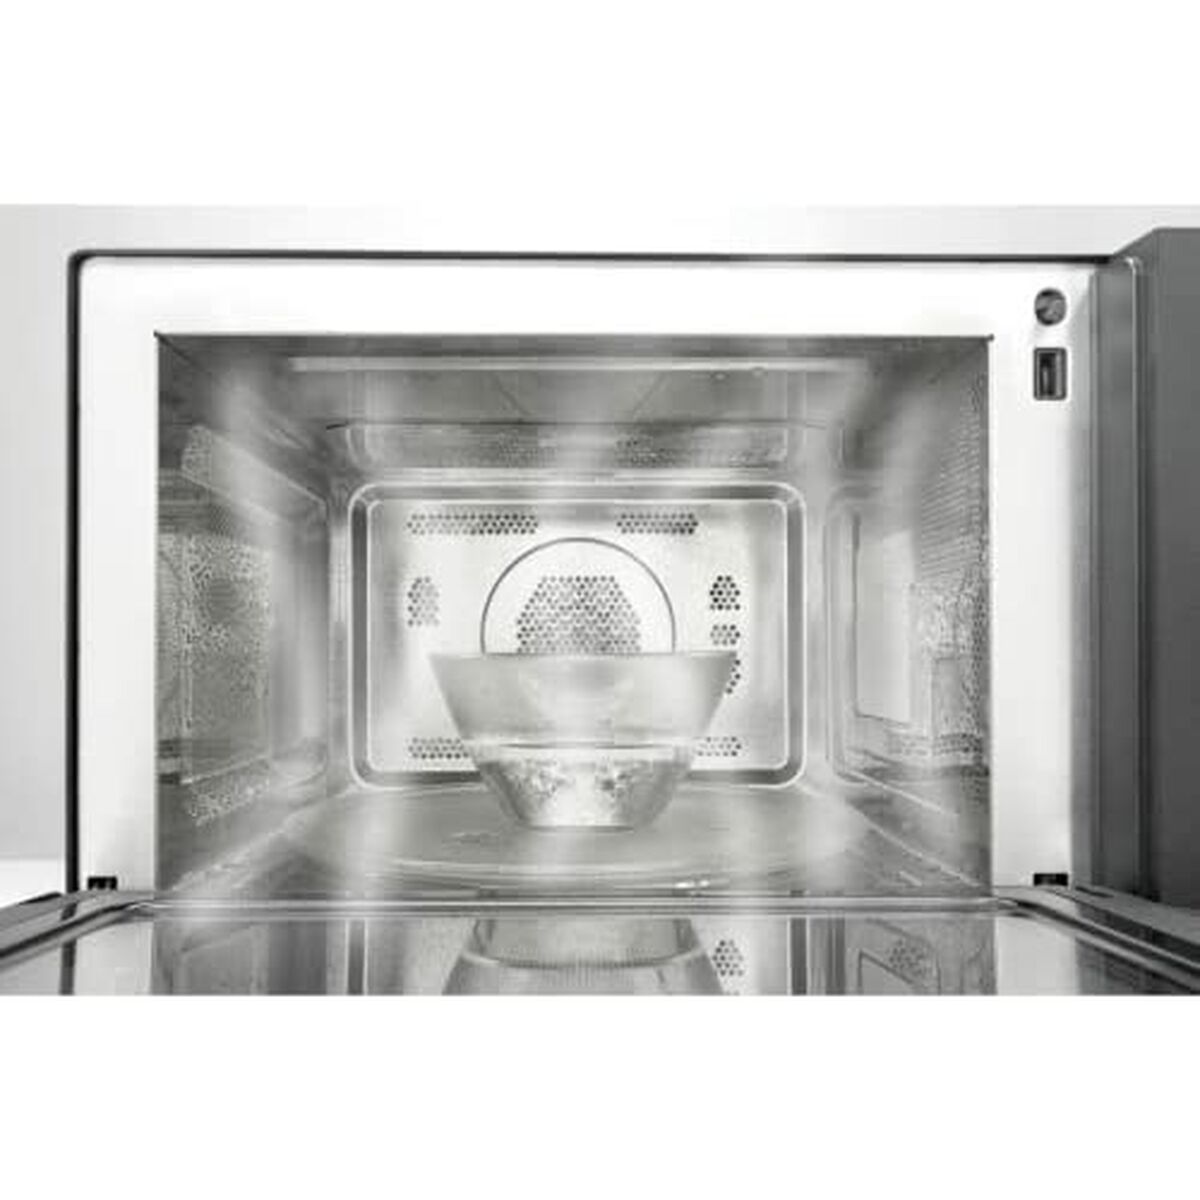 Microwave with Grill Hisense H30MOBS10HC Black 1000 W 30 L